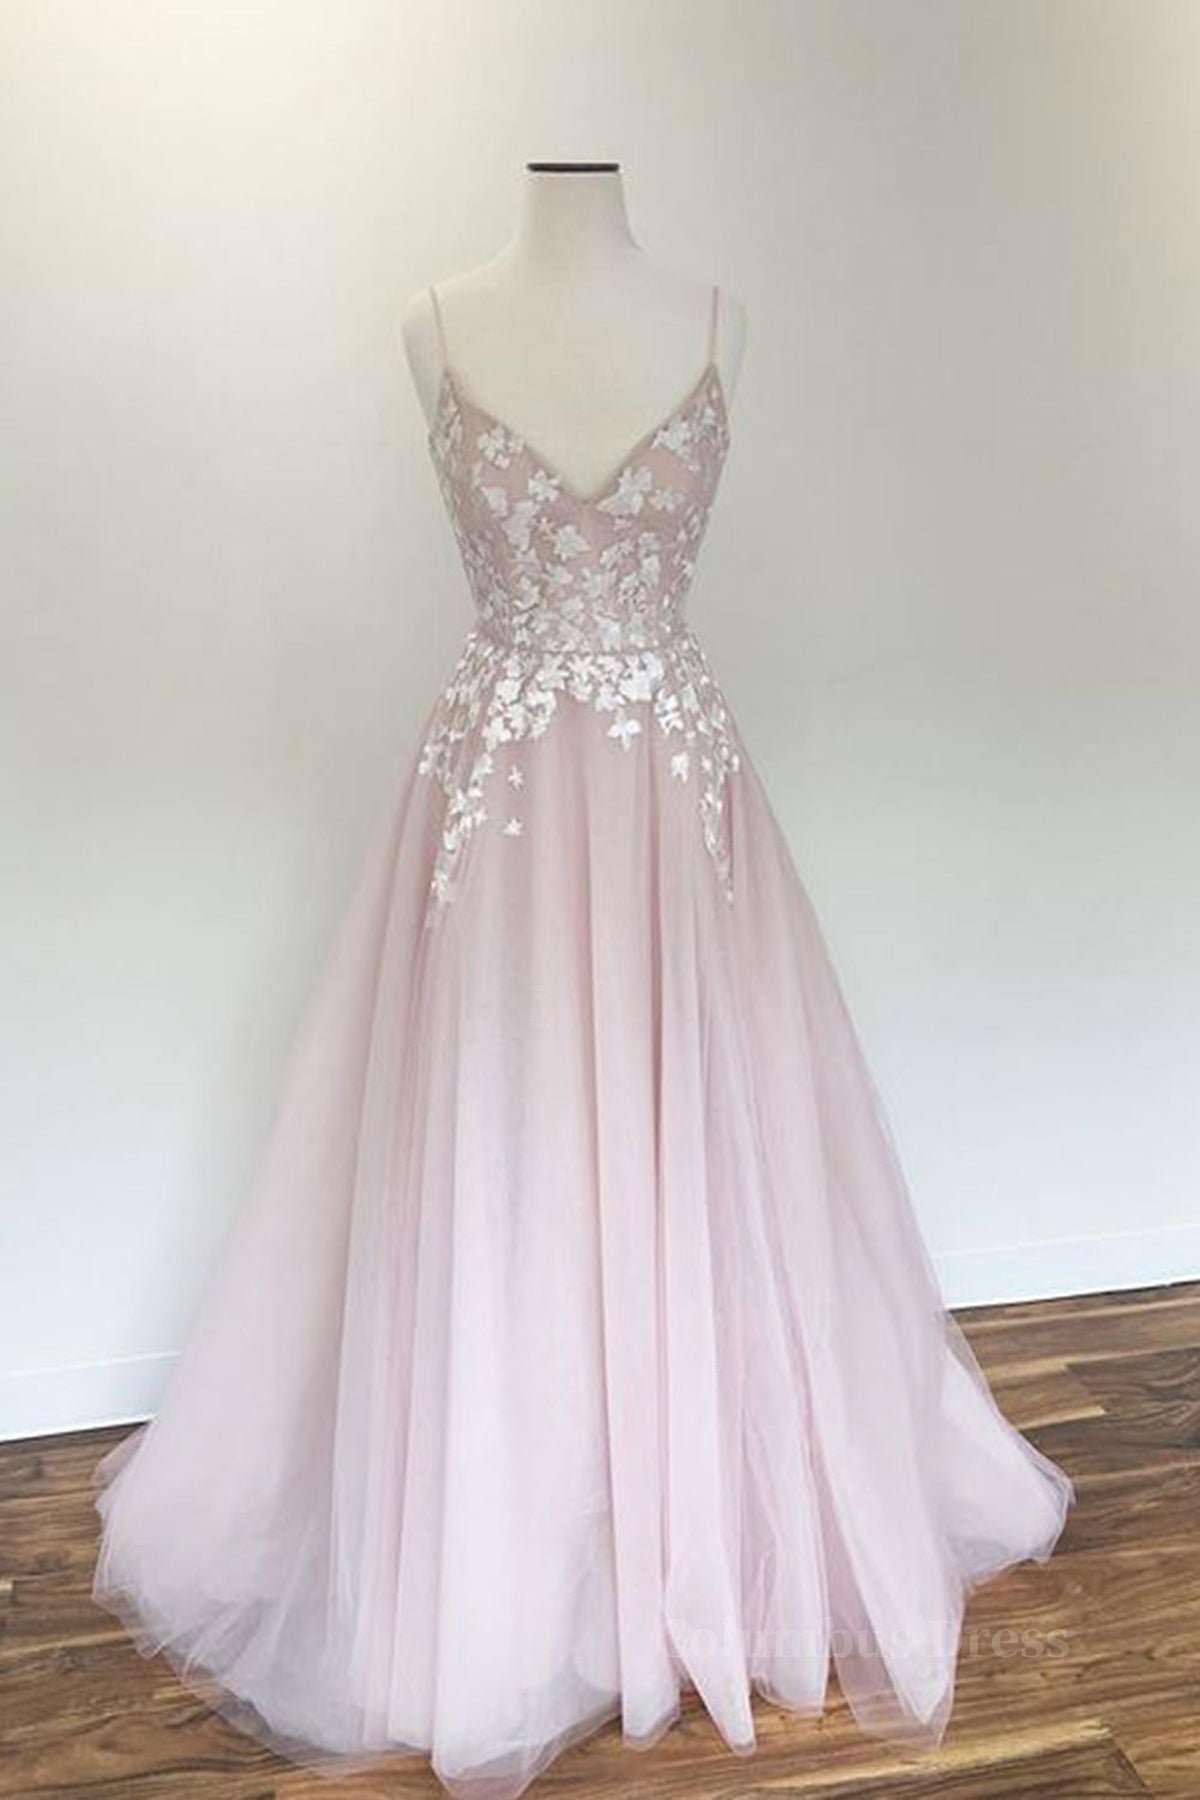 Gown Dress, V Neck Light Pink Tulle Lace Prom Dresses, Light Pink Tulle Lace Formal Evening Dresses